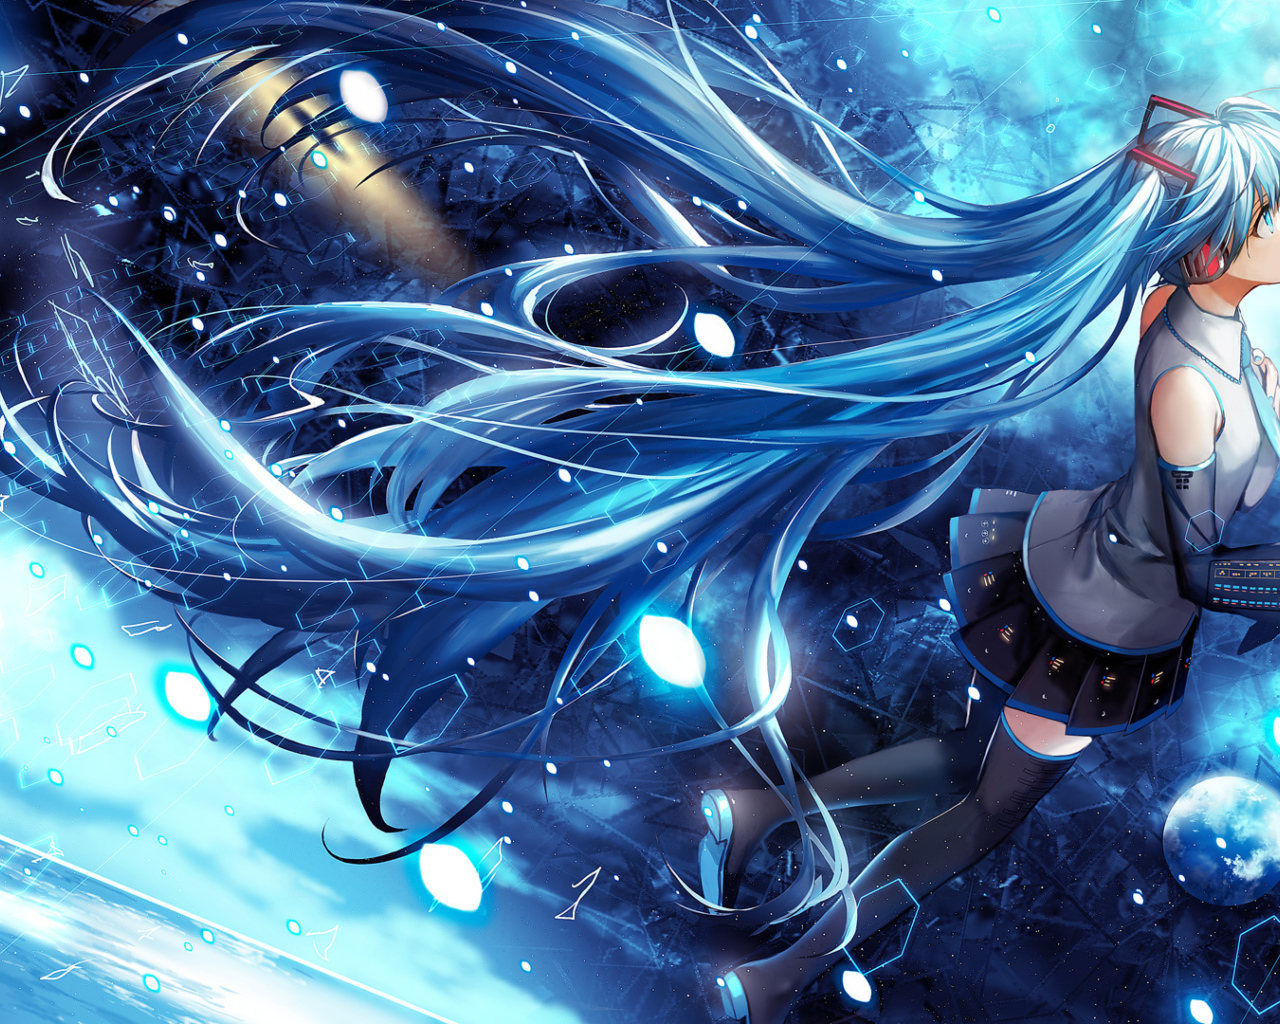 Miku Hatsune anime girl with long blue hair in space